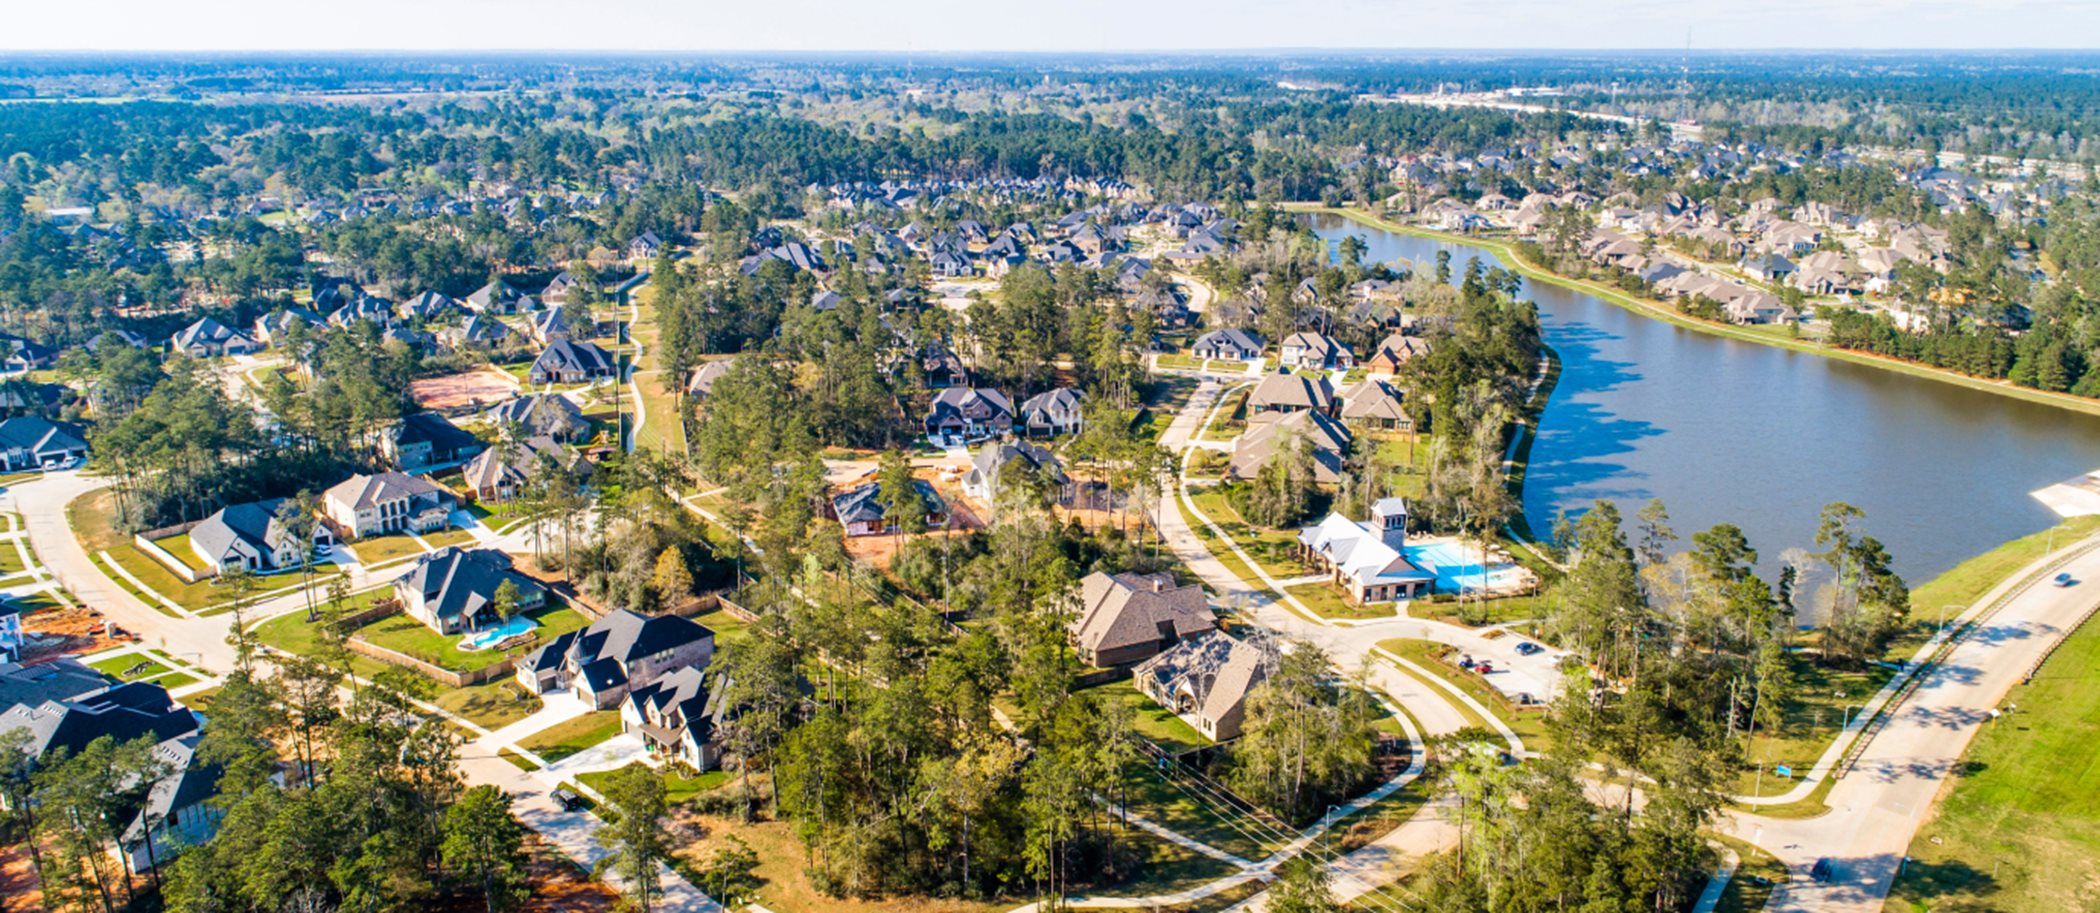 Aerial view of Woodtrace